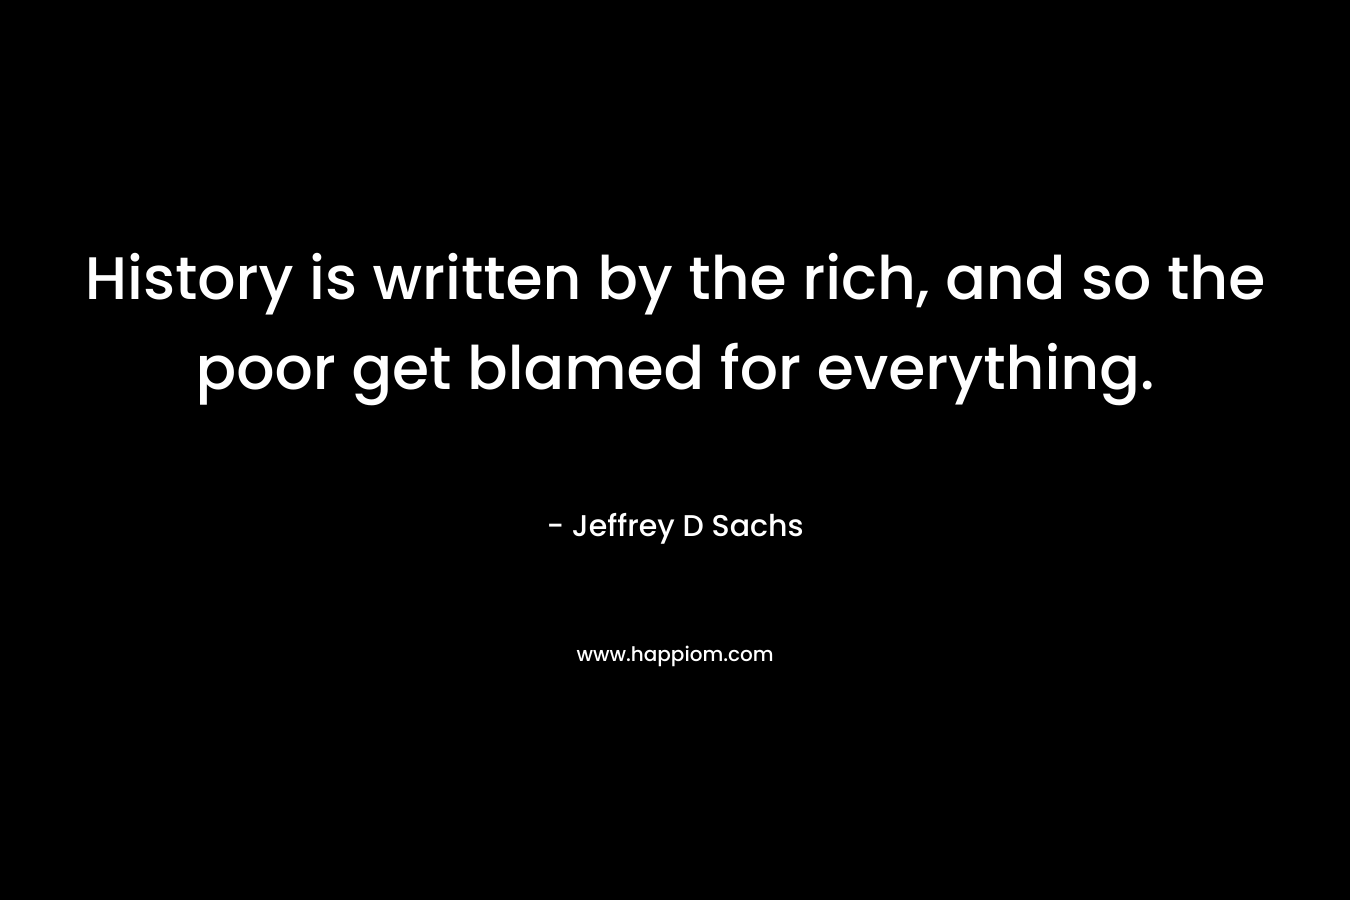 History is written by the rich, and so the poor get blamed for everything.